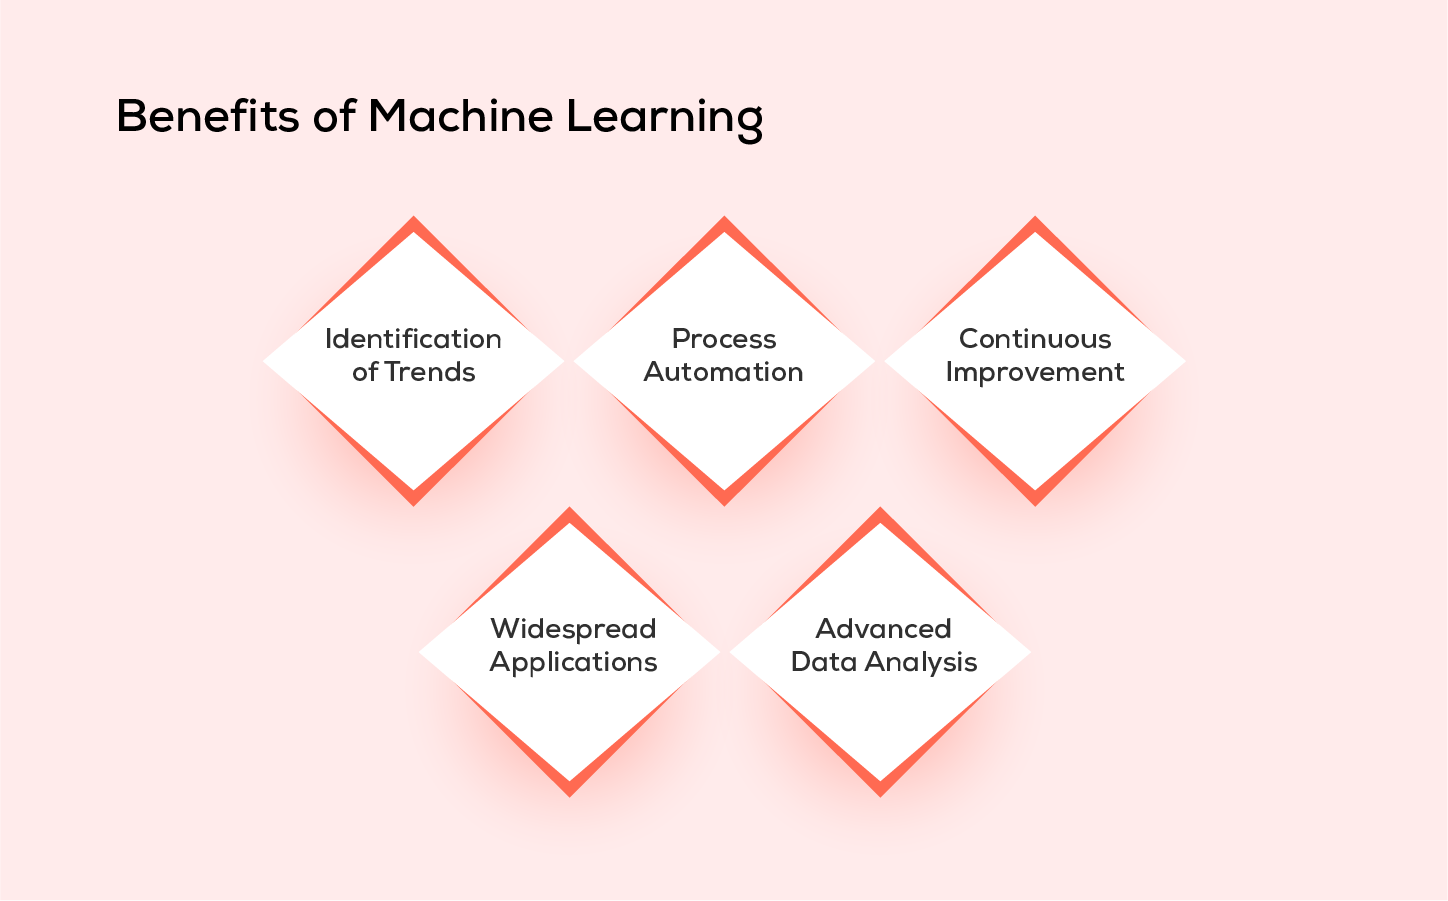 Benefits of Machine Learning